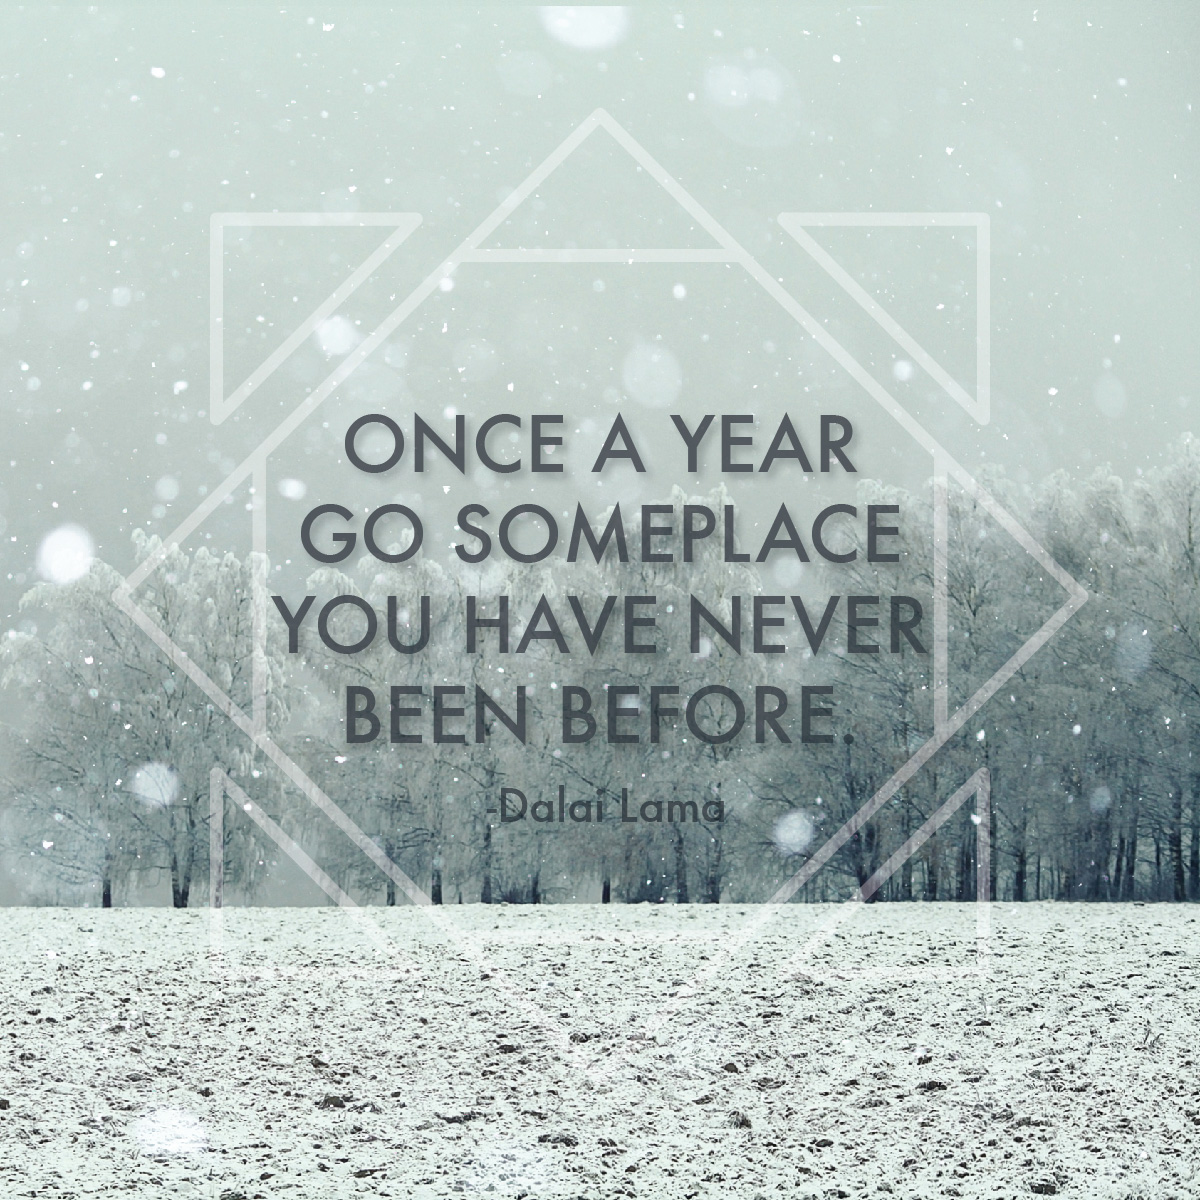 Travel Quote: once a year go someplace you have never been before